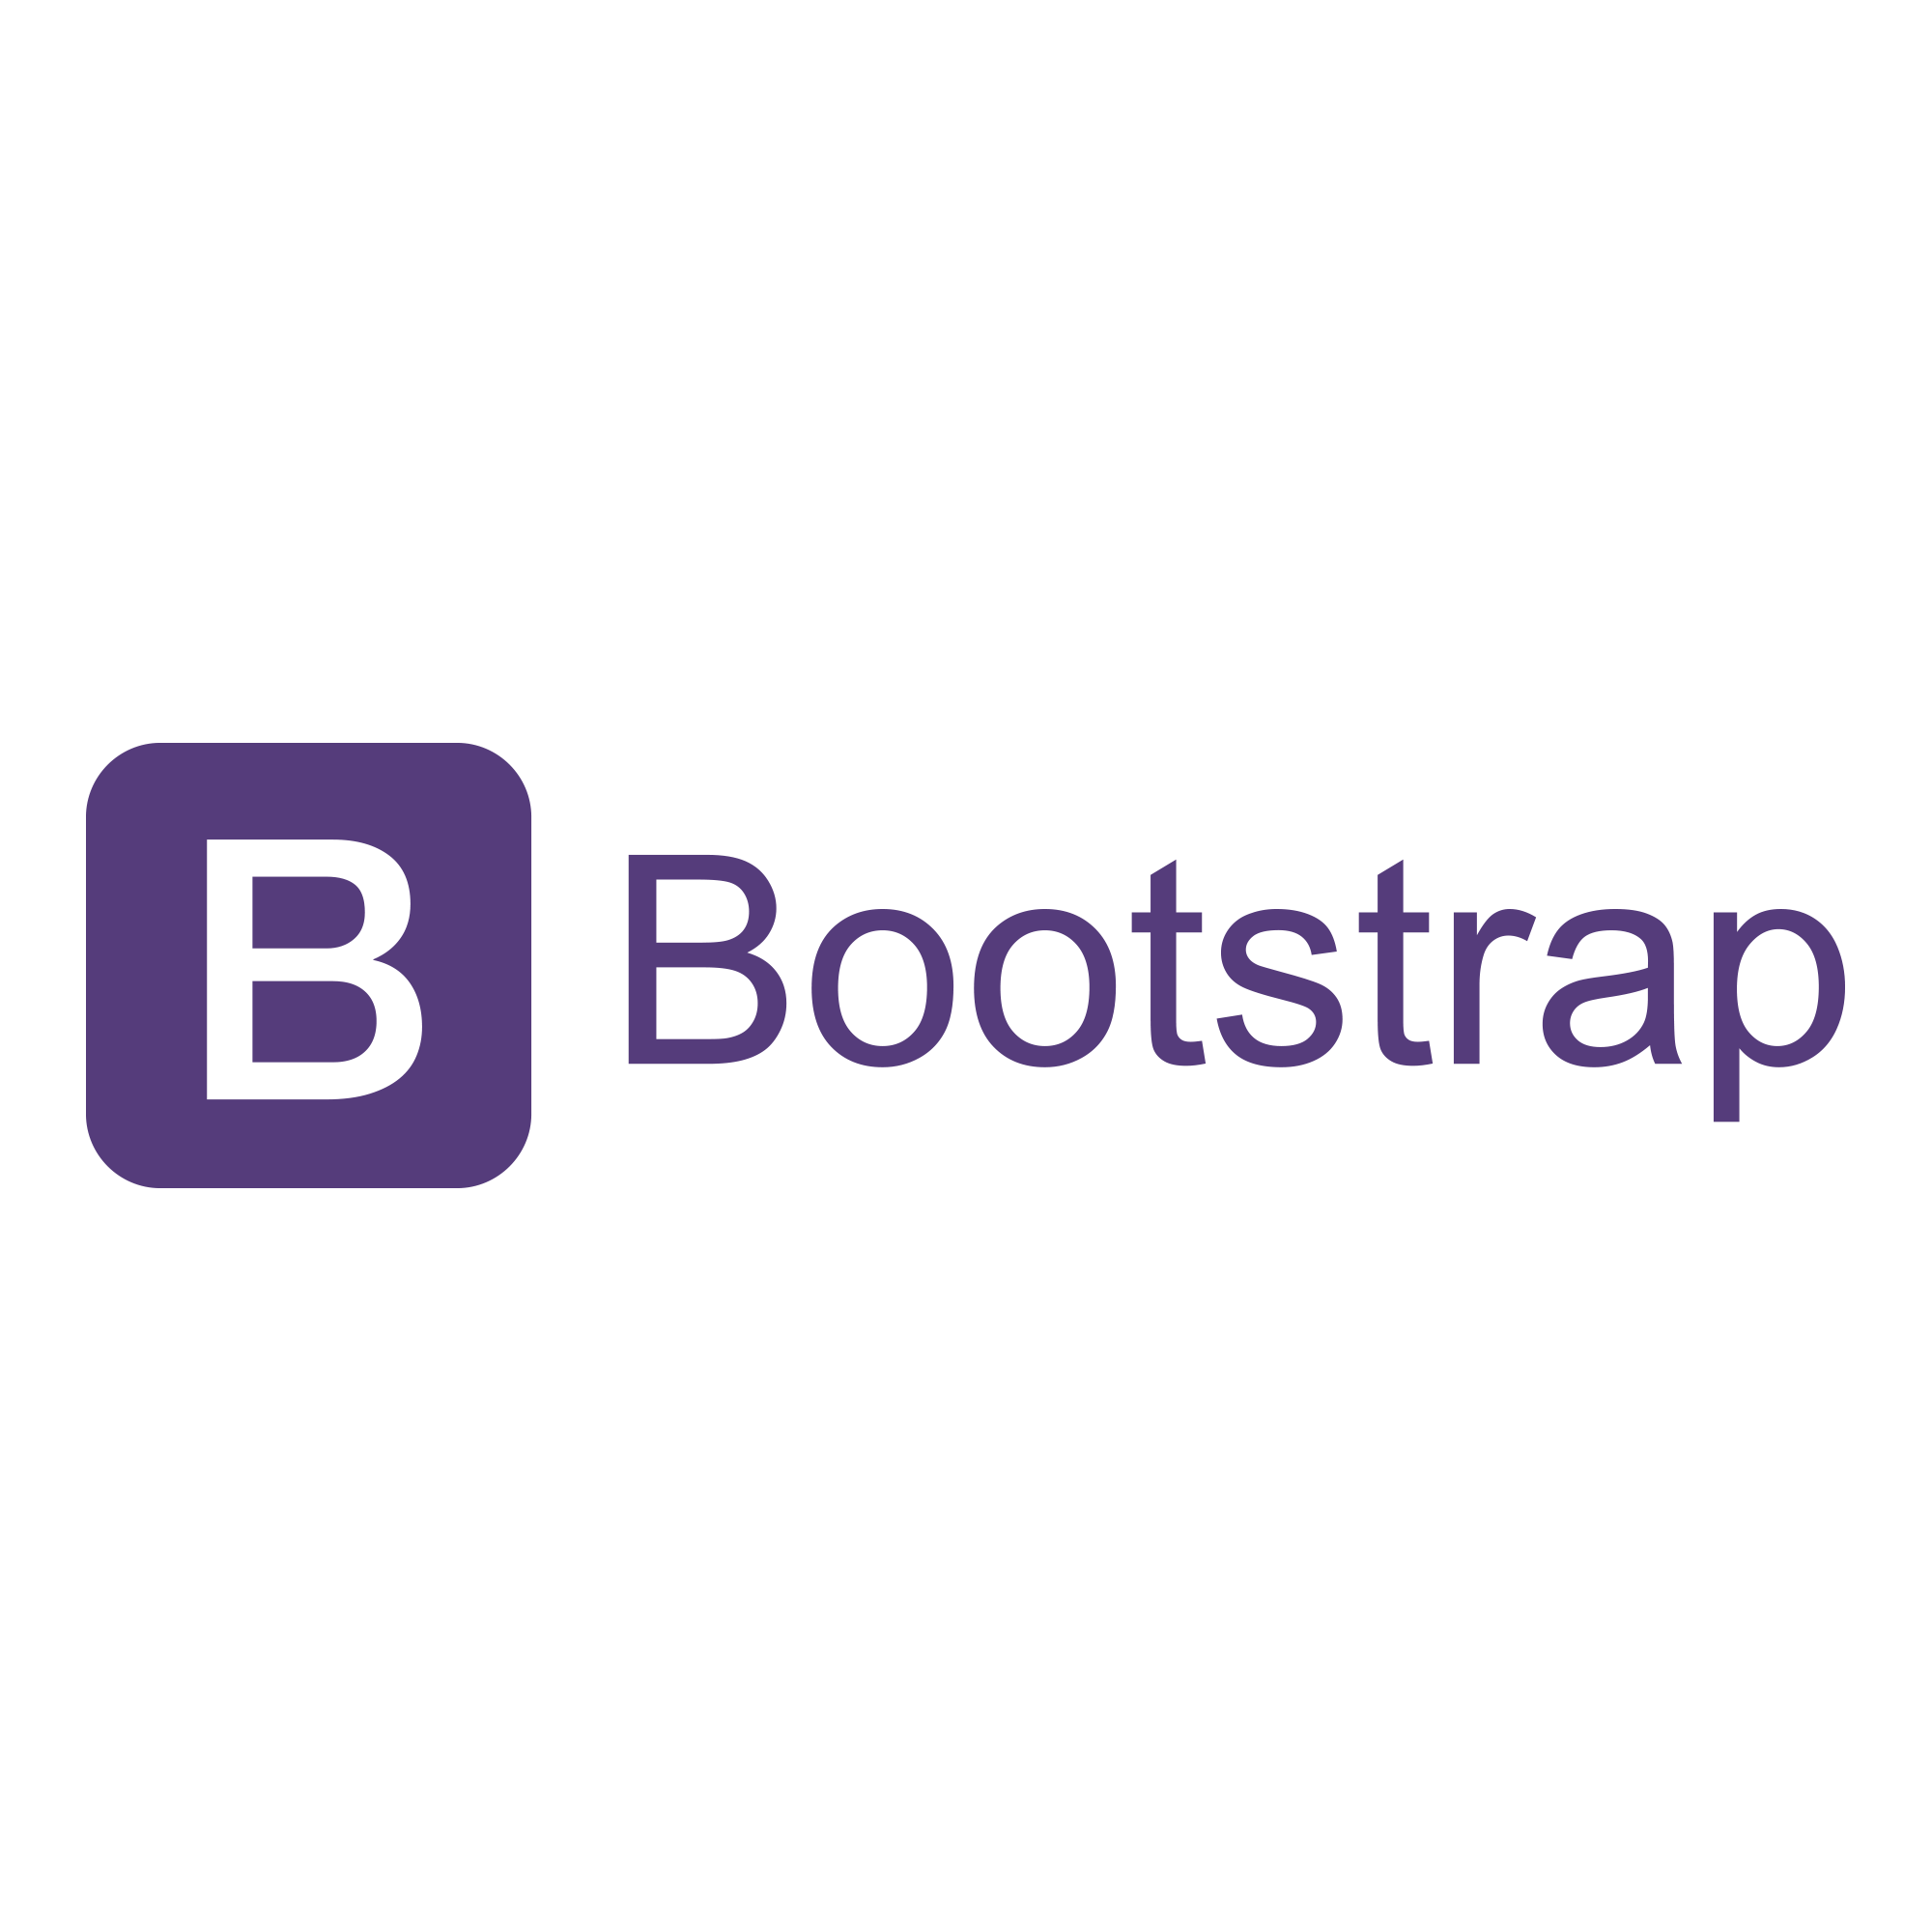 Bootstrap. Картинка Bootstrap. Бутстрап логотип. Логотип Bootstrap PNG. Bootstrap org